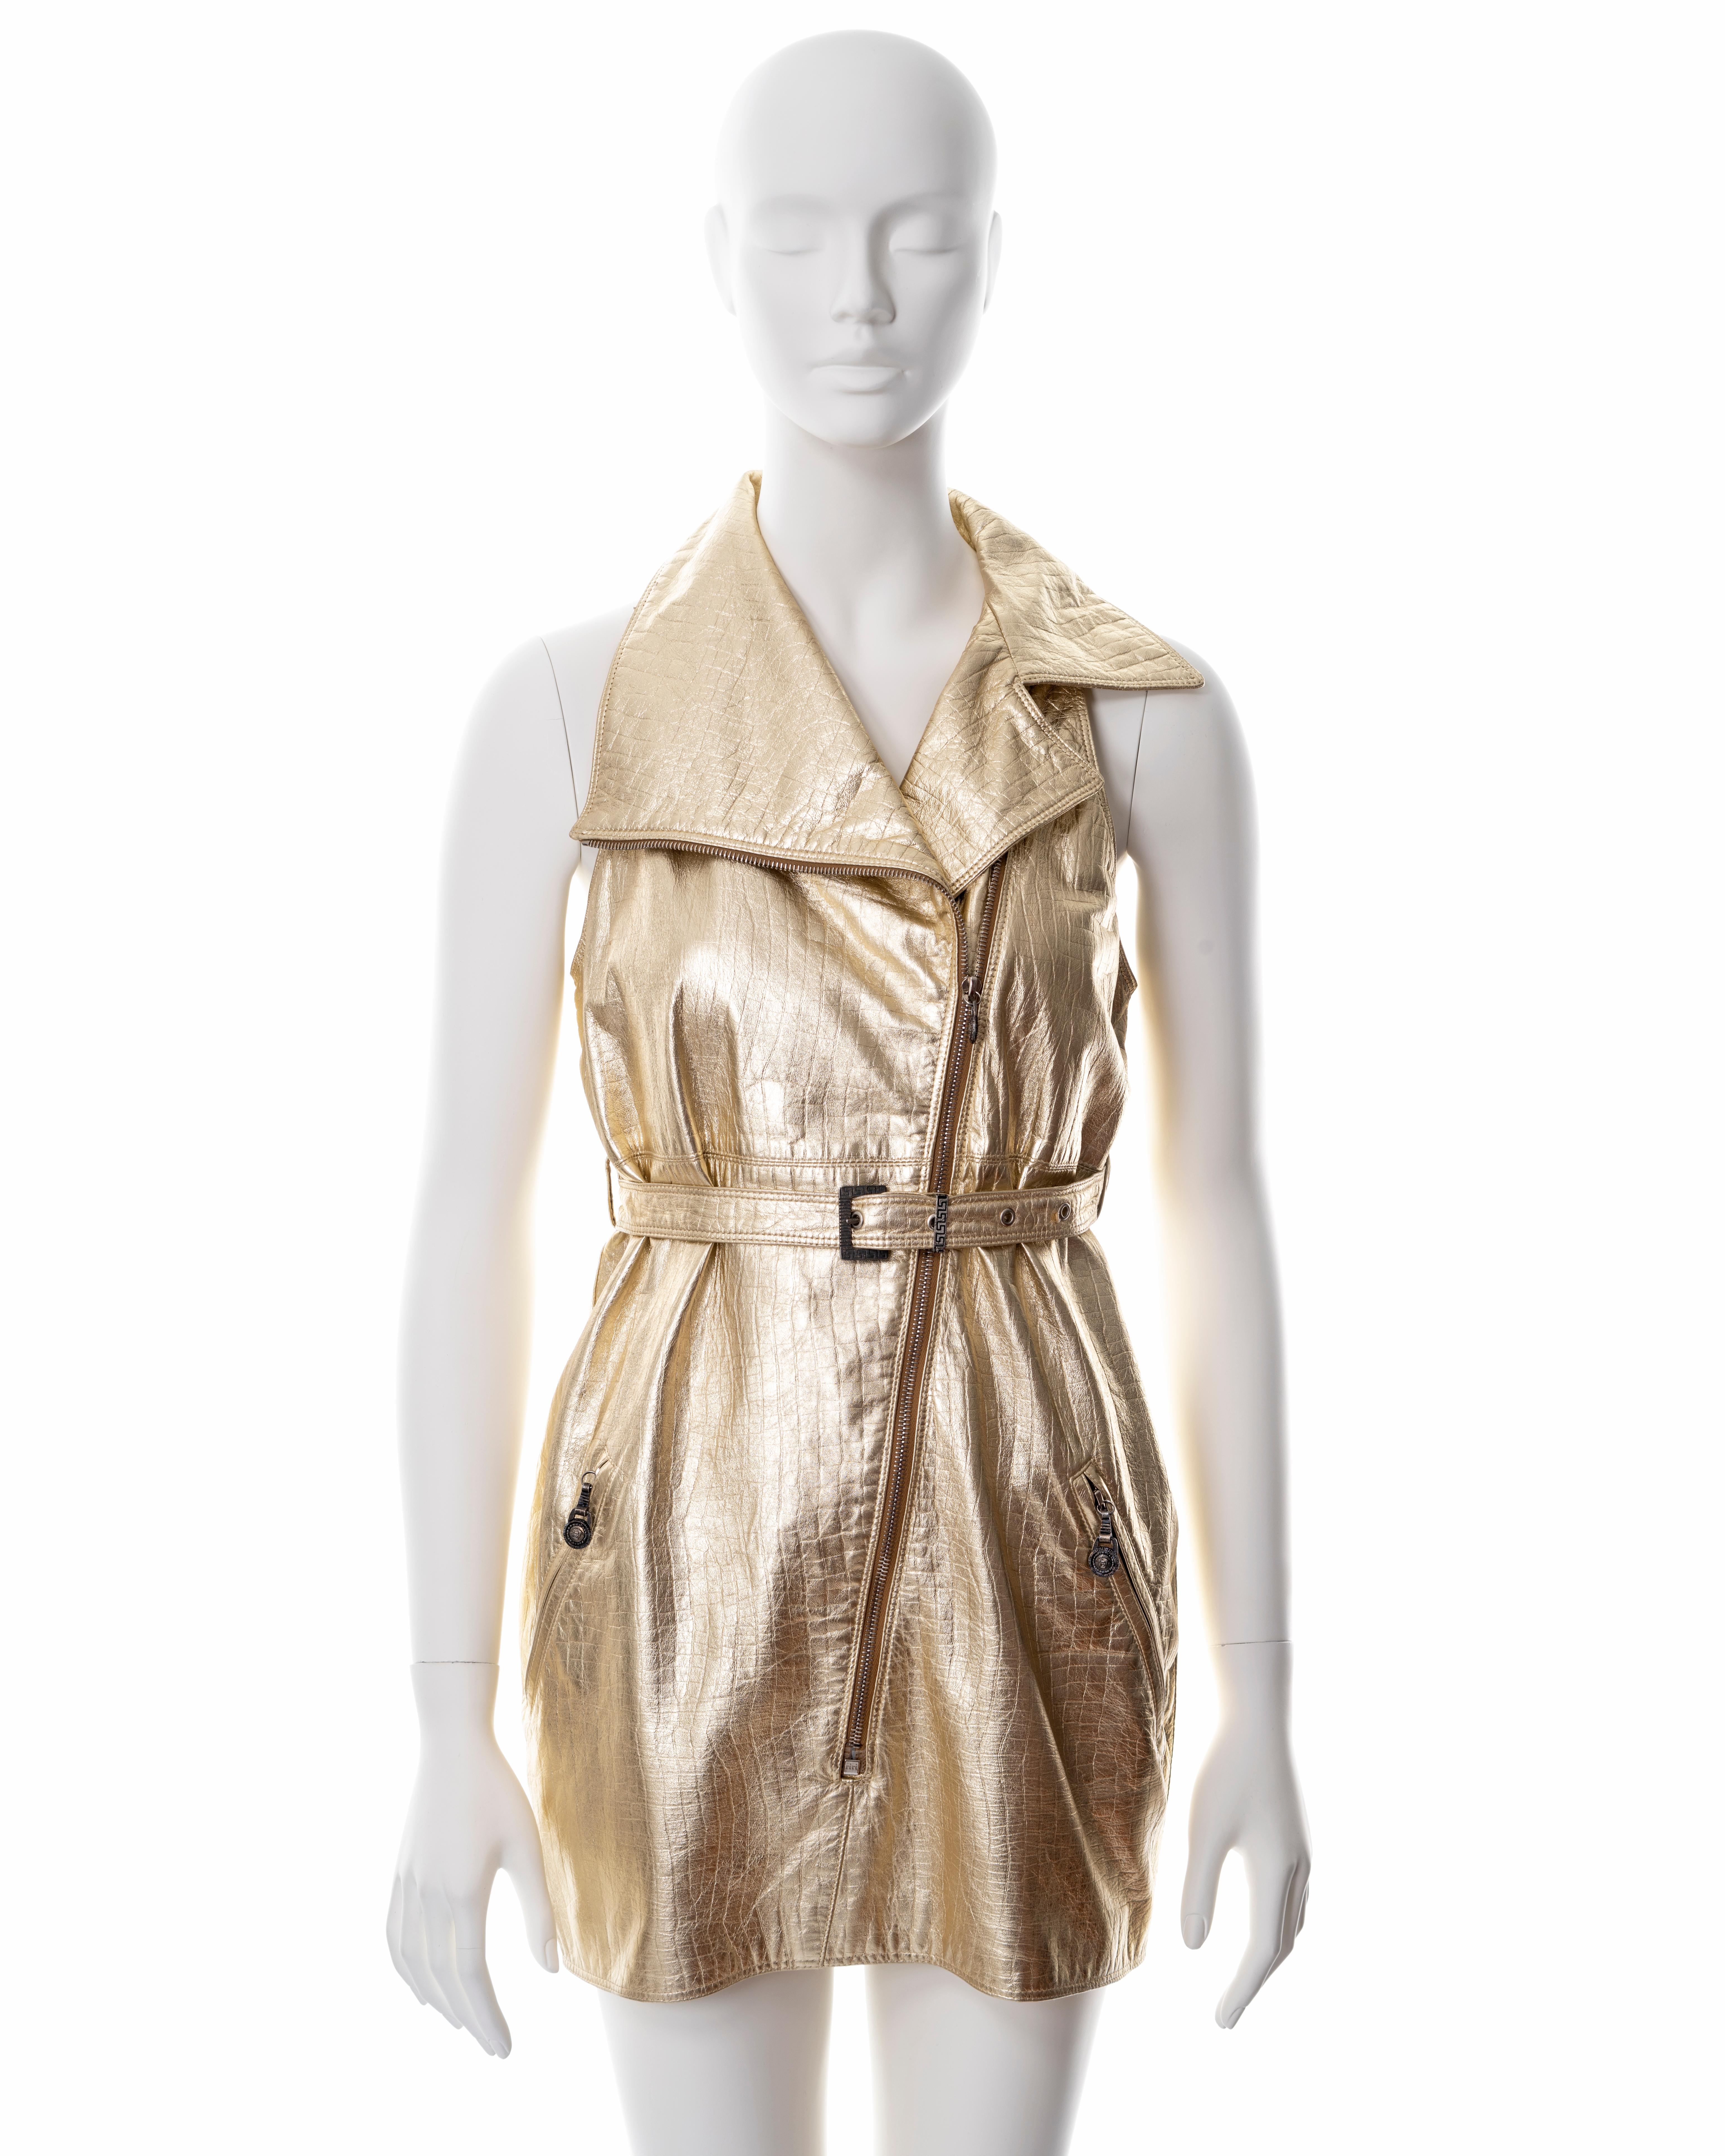 ▪ Gianni Versace metallic gold leather mini dress
▪ Fall-Winter 1994
▪ Croc-embossed 
▪ Diagonal front zipper 
▪ 2 front pockets 
▪ IT 40 - FR 36 - UK 8 - US 4
▪ Made in Italy

All photographs in this listing EXCLUDING any reference or runway